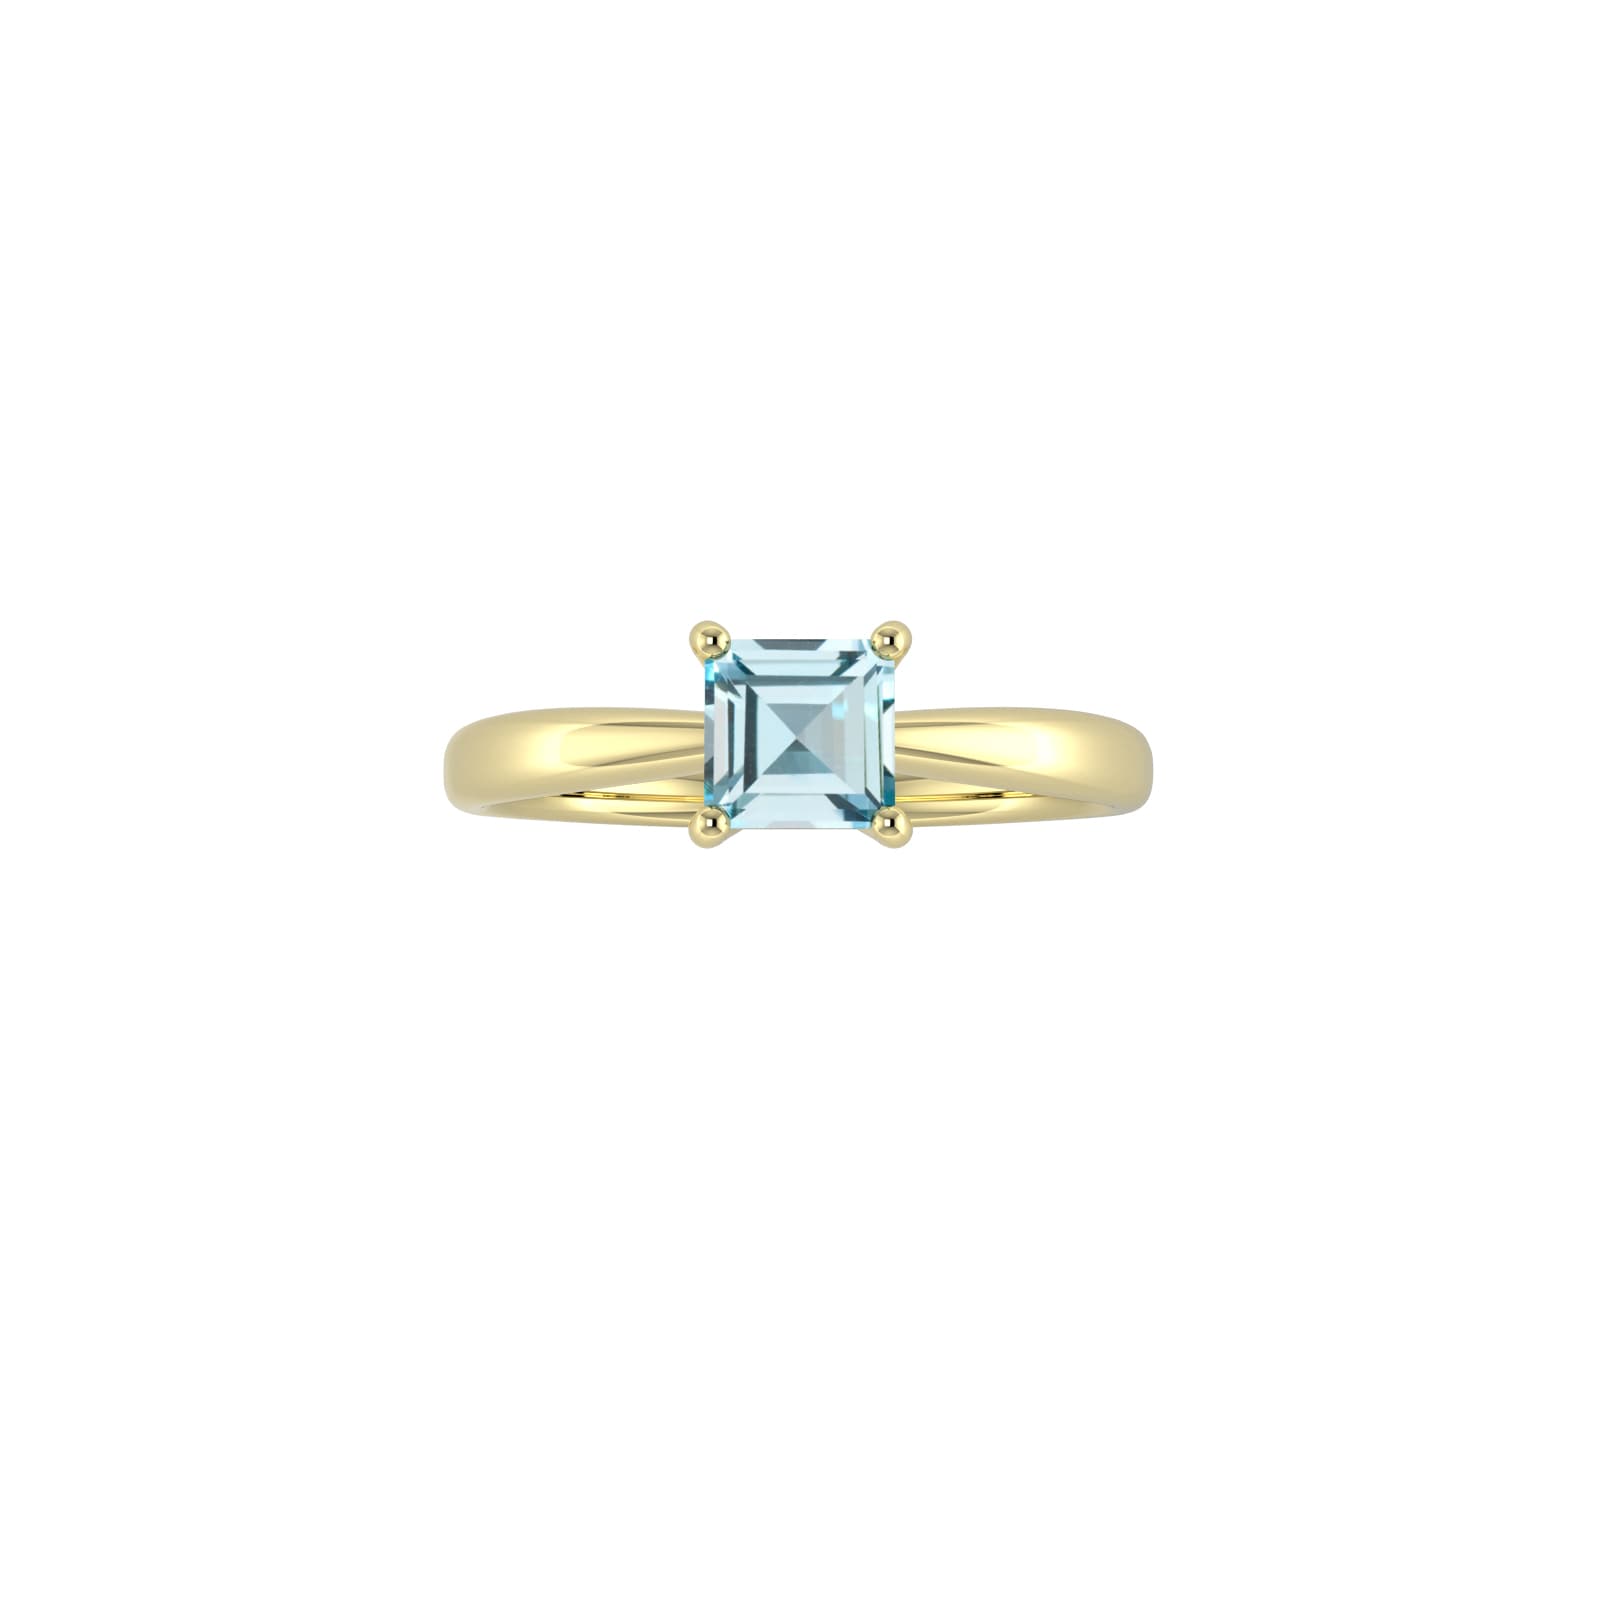 9ct Yellow Gold 4 Claw Square Aquamarine 5mm x 5mm Ring- Ring Size D